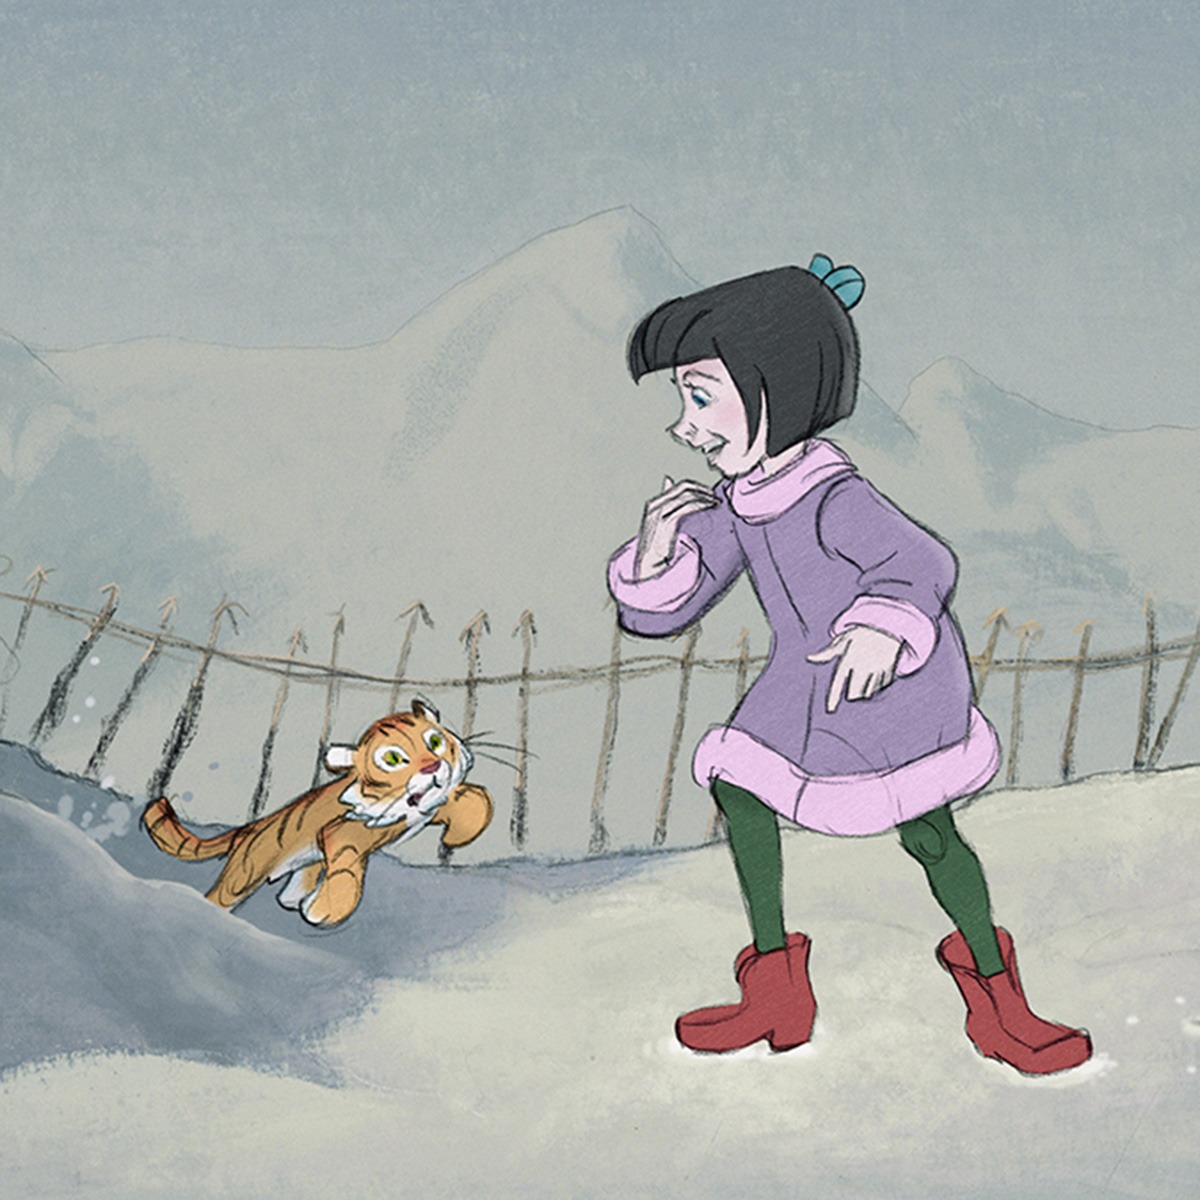 an illustration of a young girl and a baby tiger in the snow.